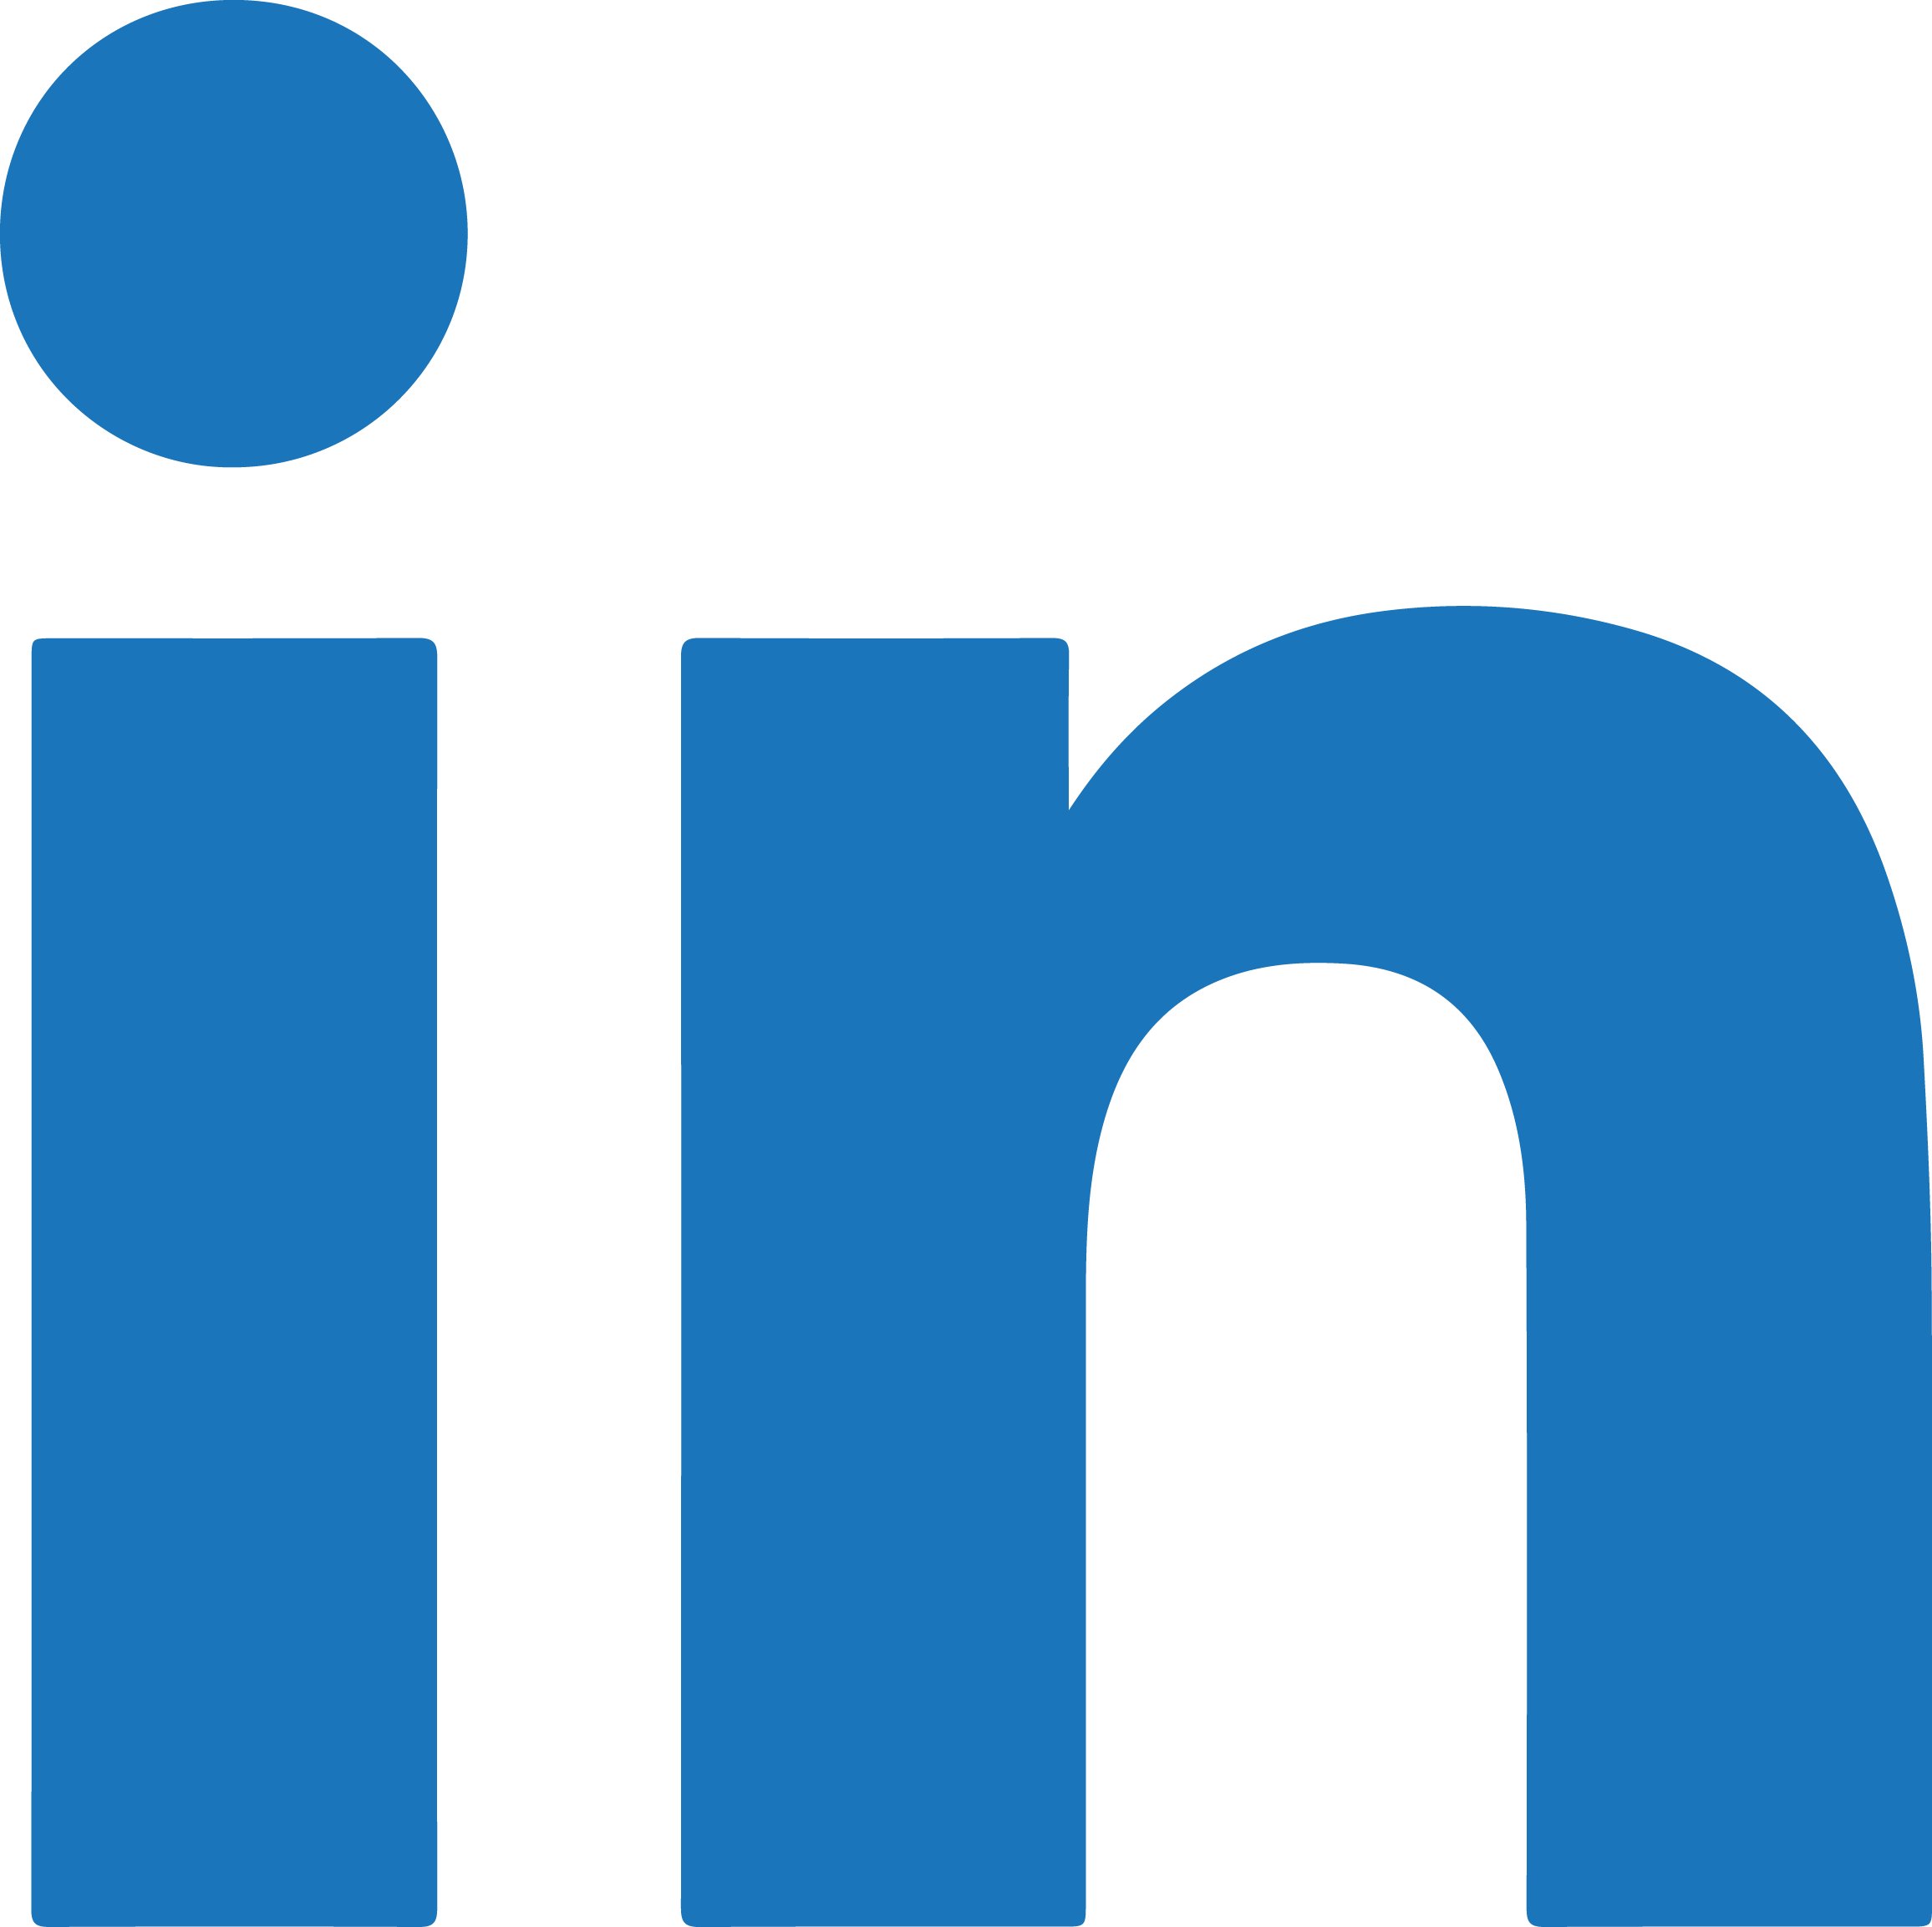 Discover 100 linkedin logo transparent - Abzlocal.in